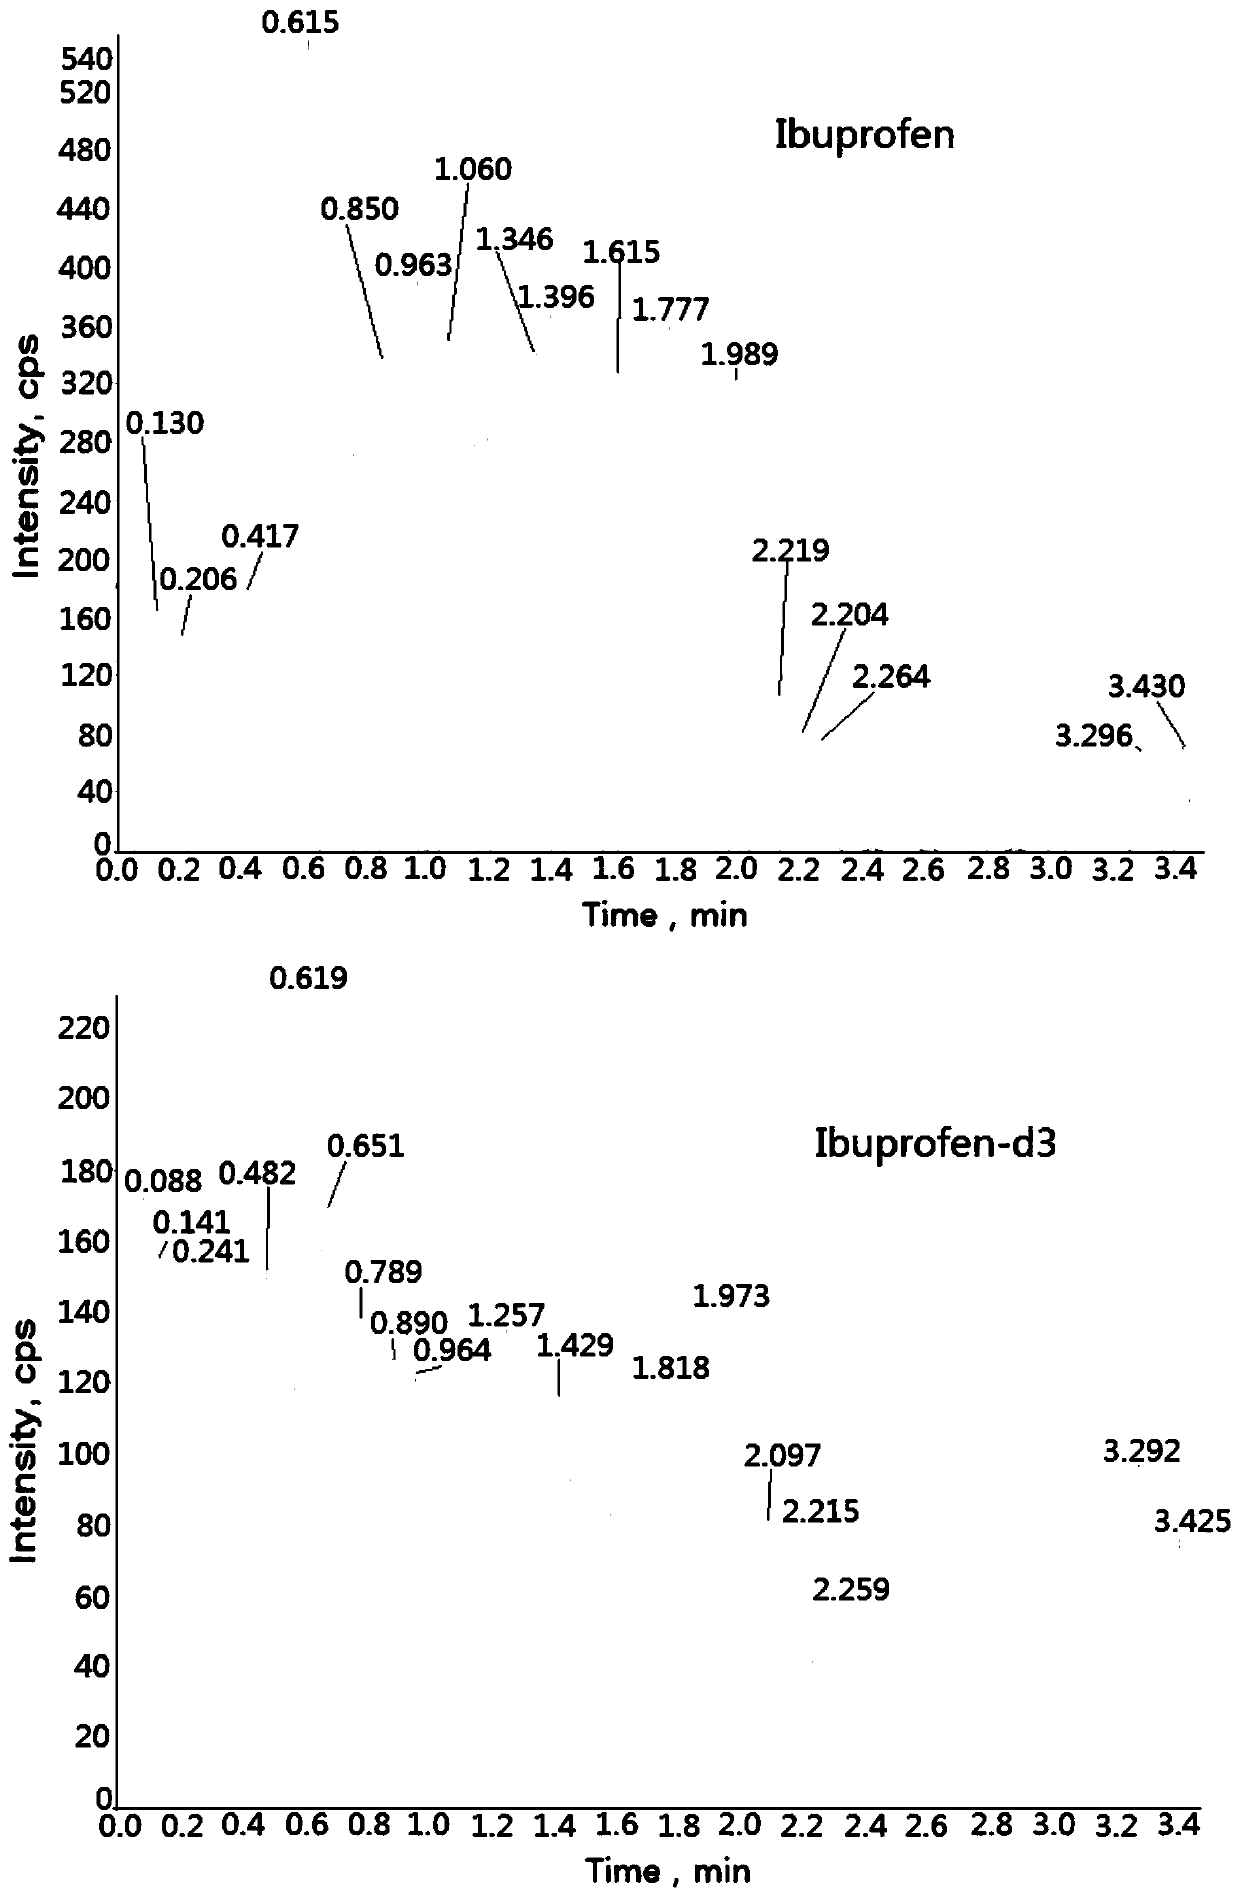 Method for determining concentration of ibuprofen in blood plasma by liquid chromatography-mass spectrometry